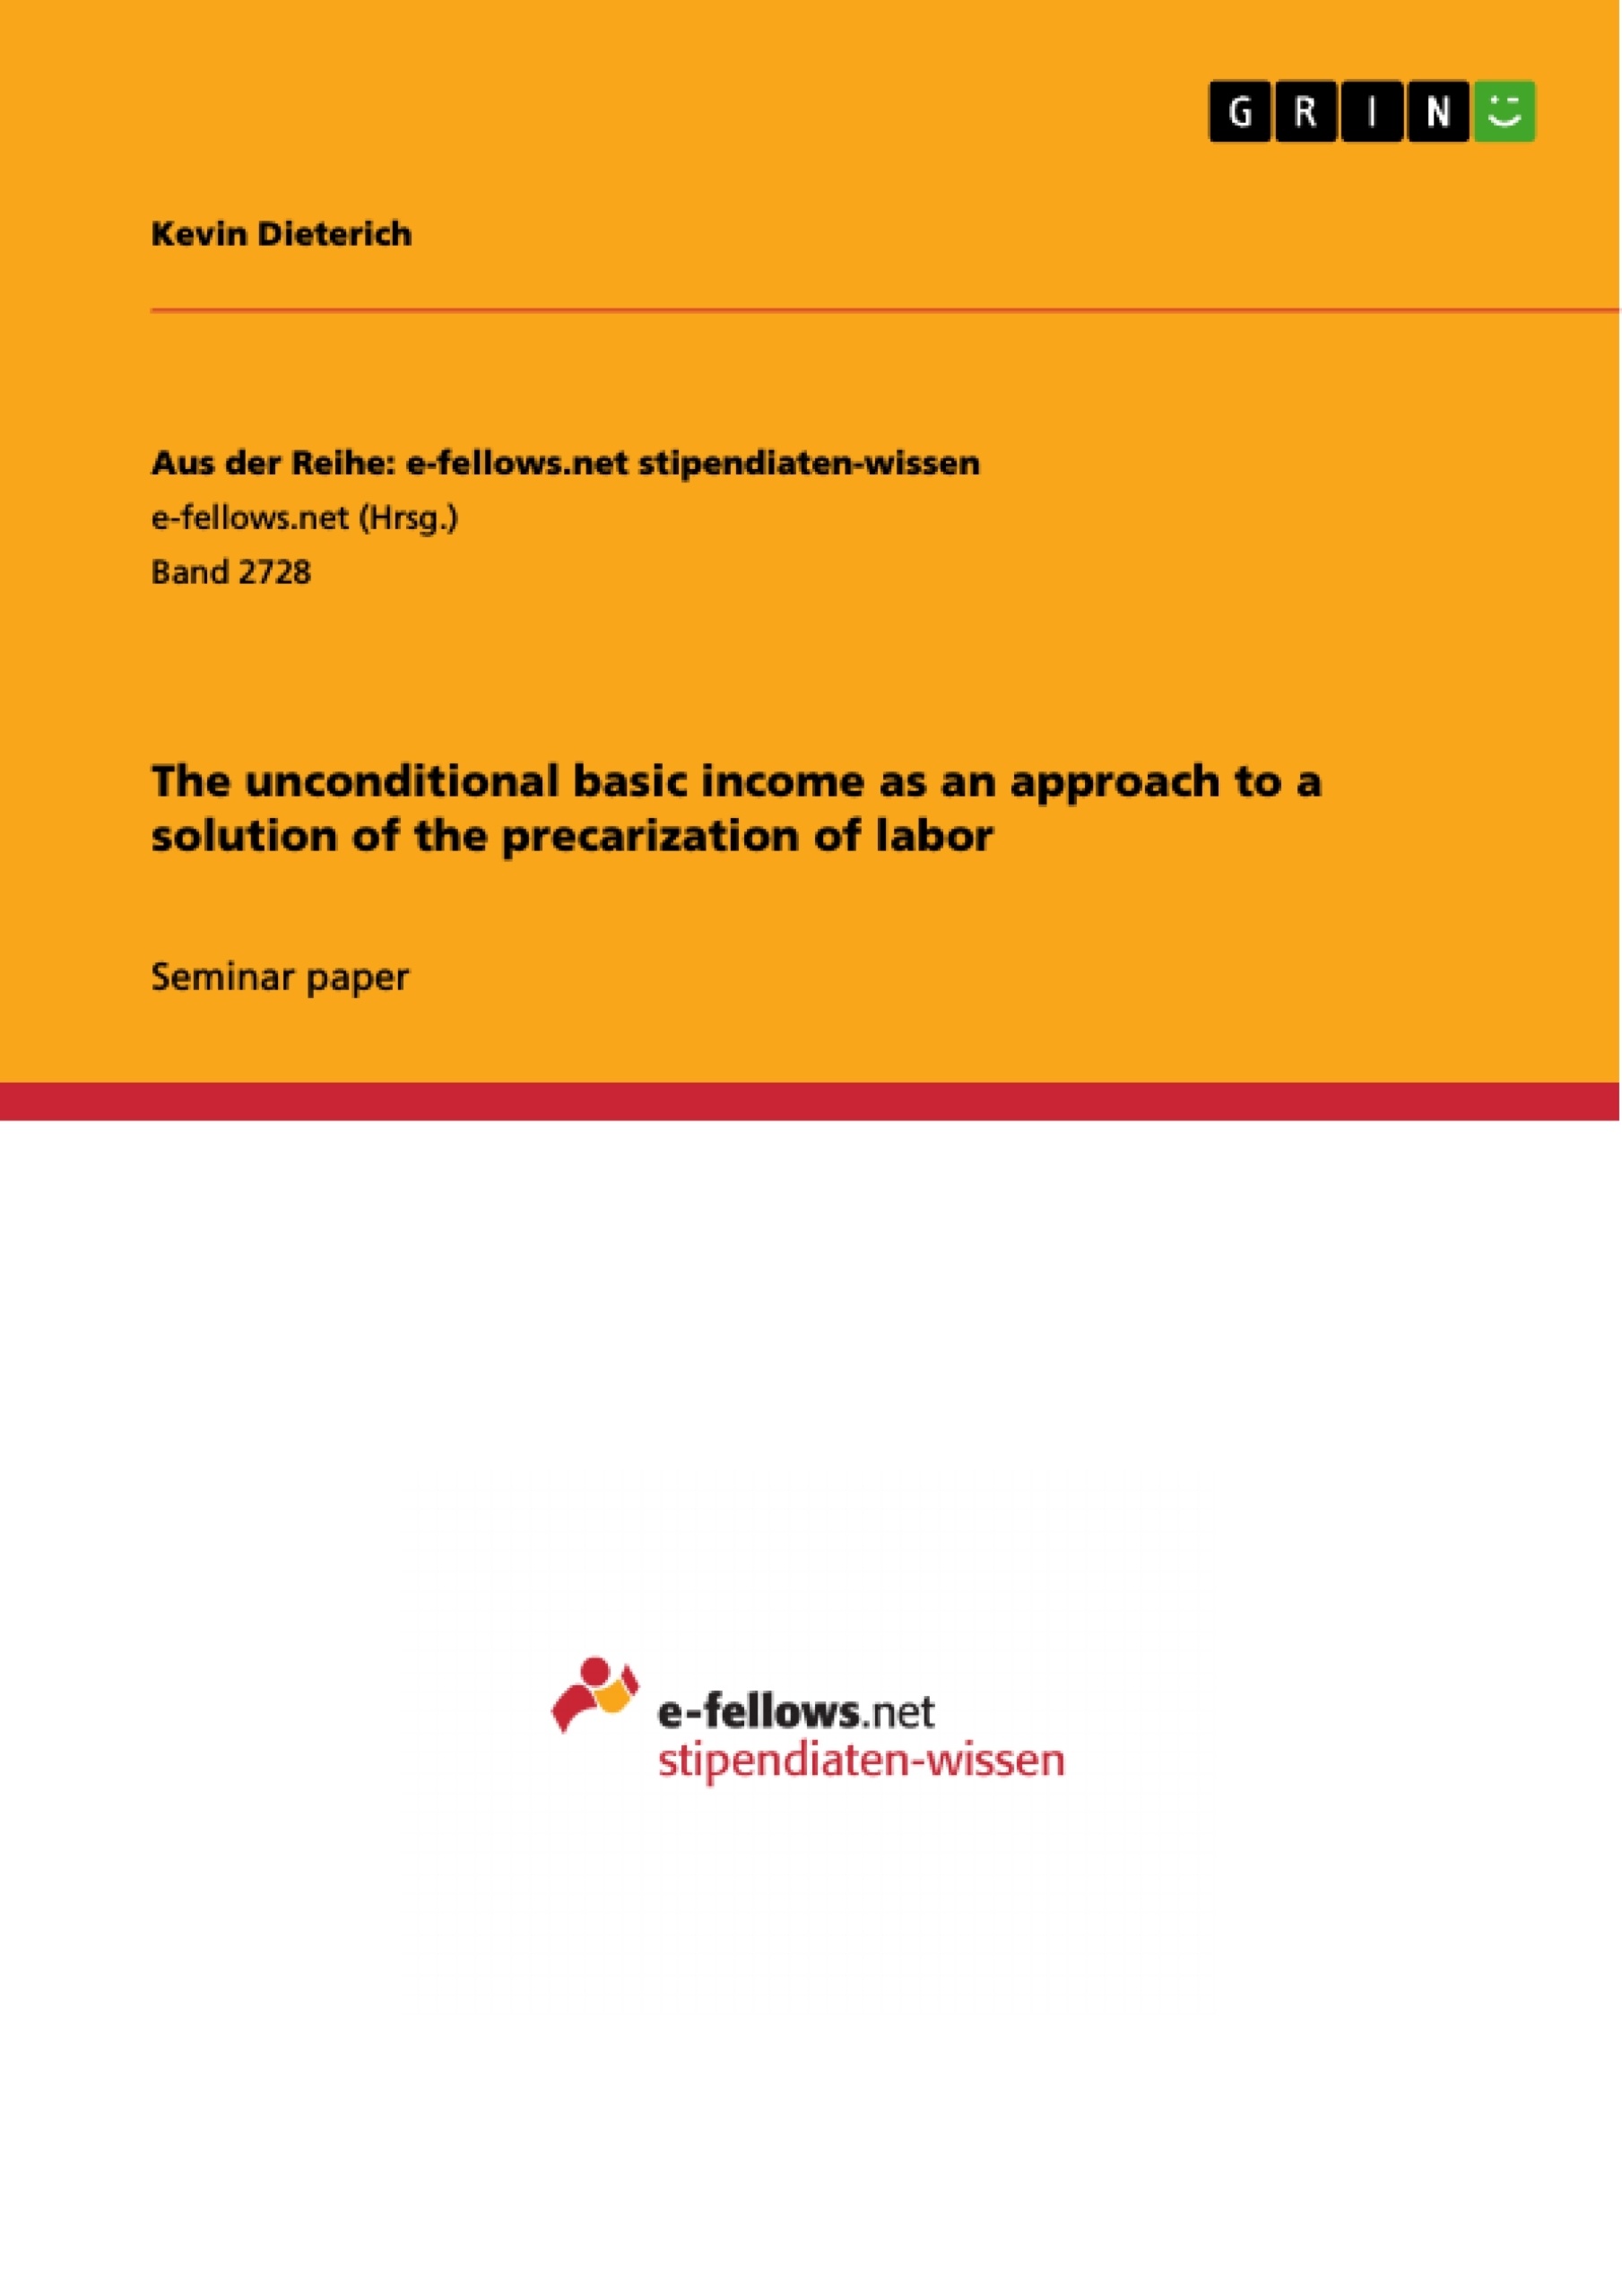 Titre: The unconditional basic income as an approach to a solution of the precarization of labor